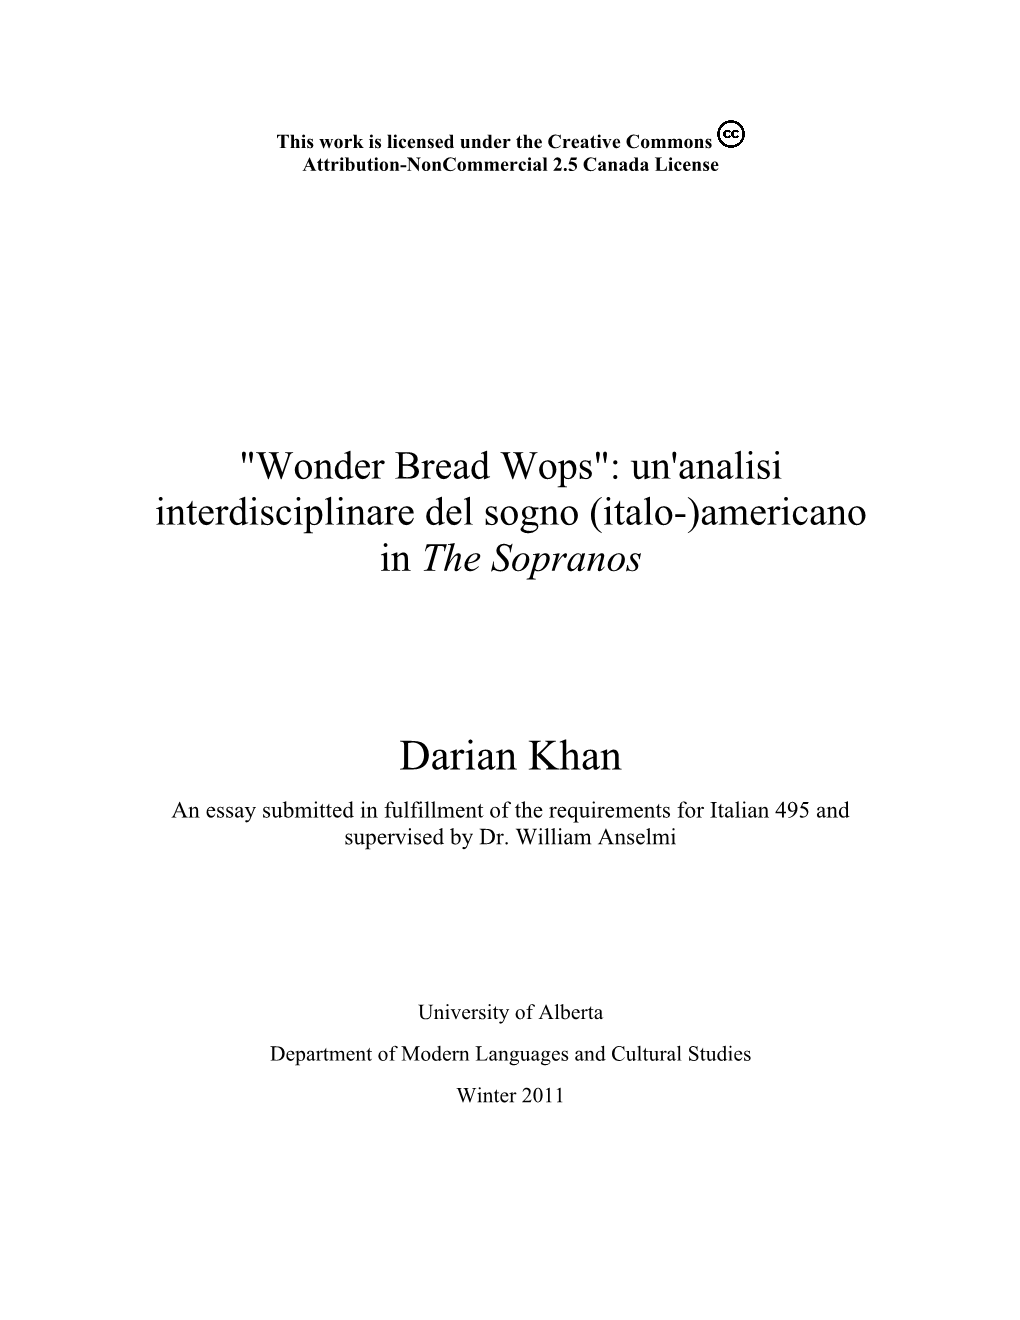 Darian Khan an Essay Submitted in Fulfillment of the Requirements for Italian 495 and Supervised by Dr